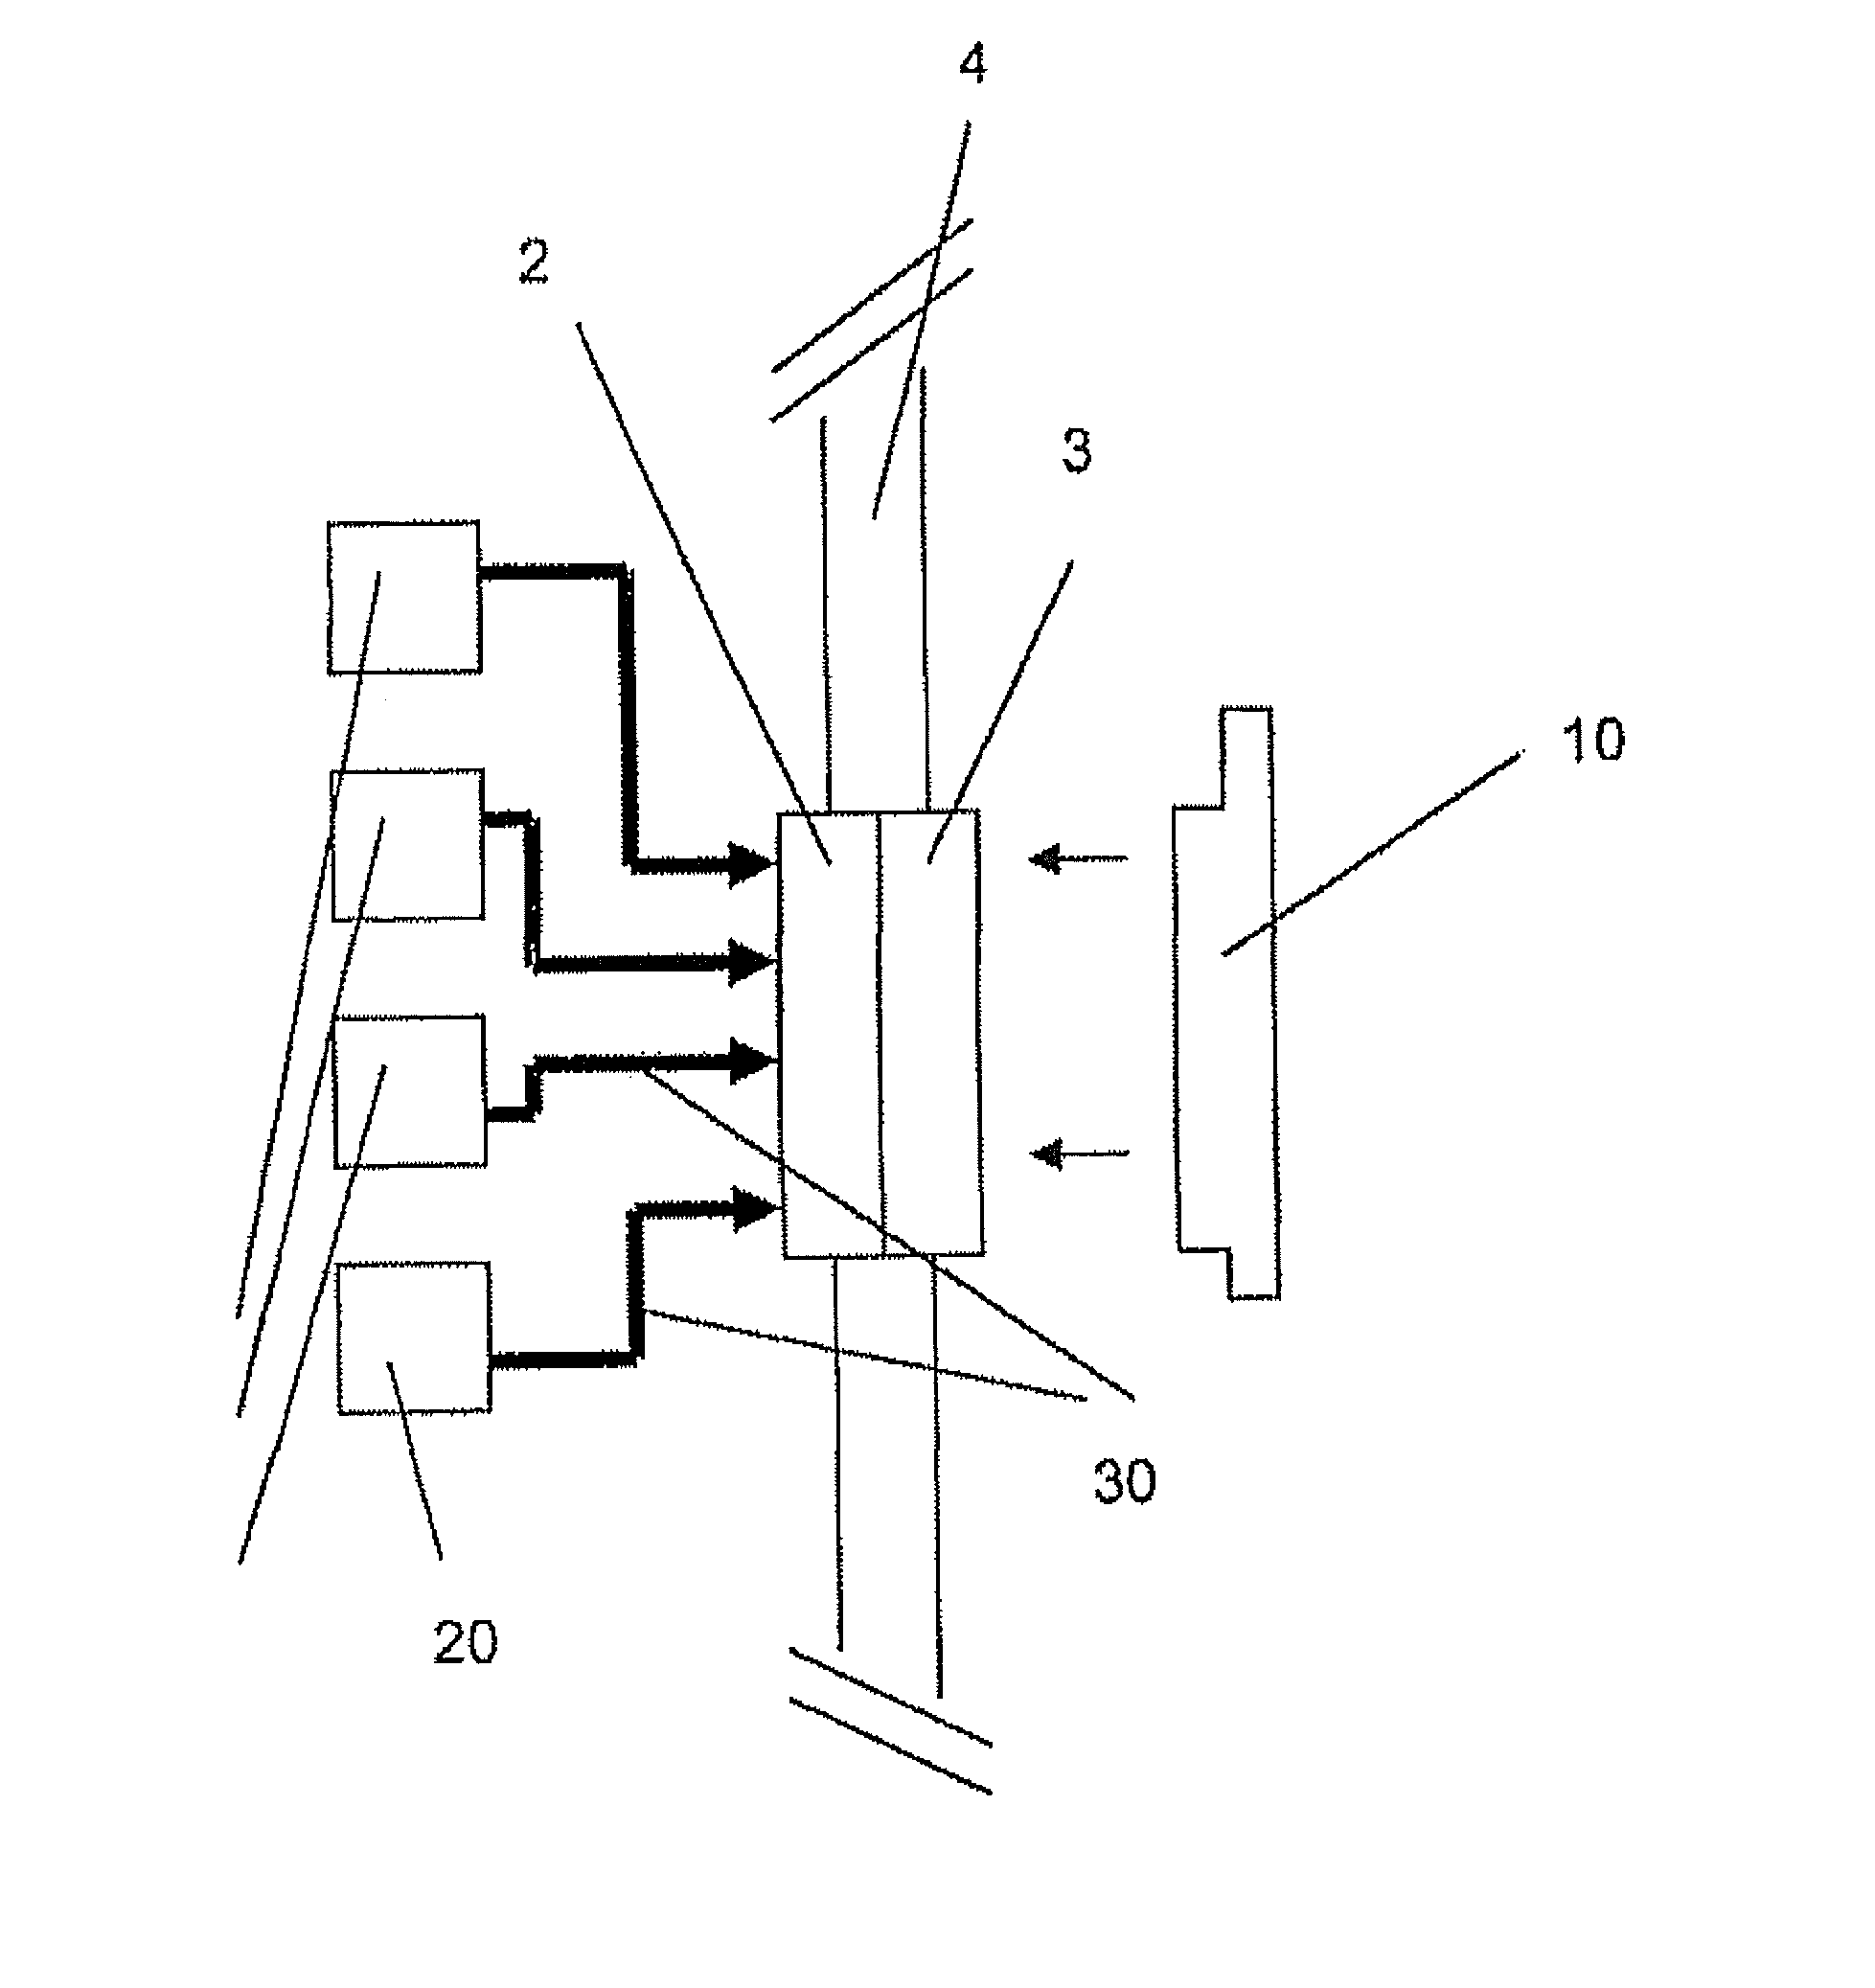 Medium-voltage or high-voltage switching or control device, in particular a switchgear assembly